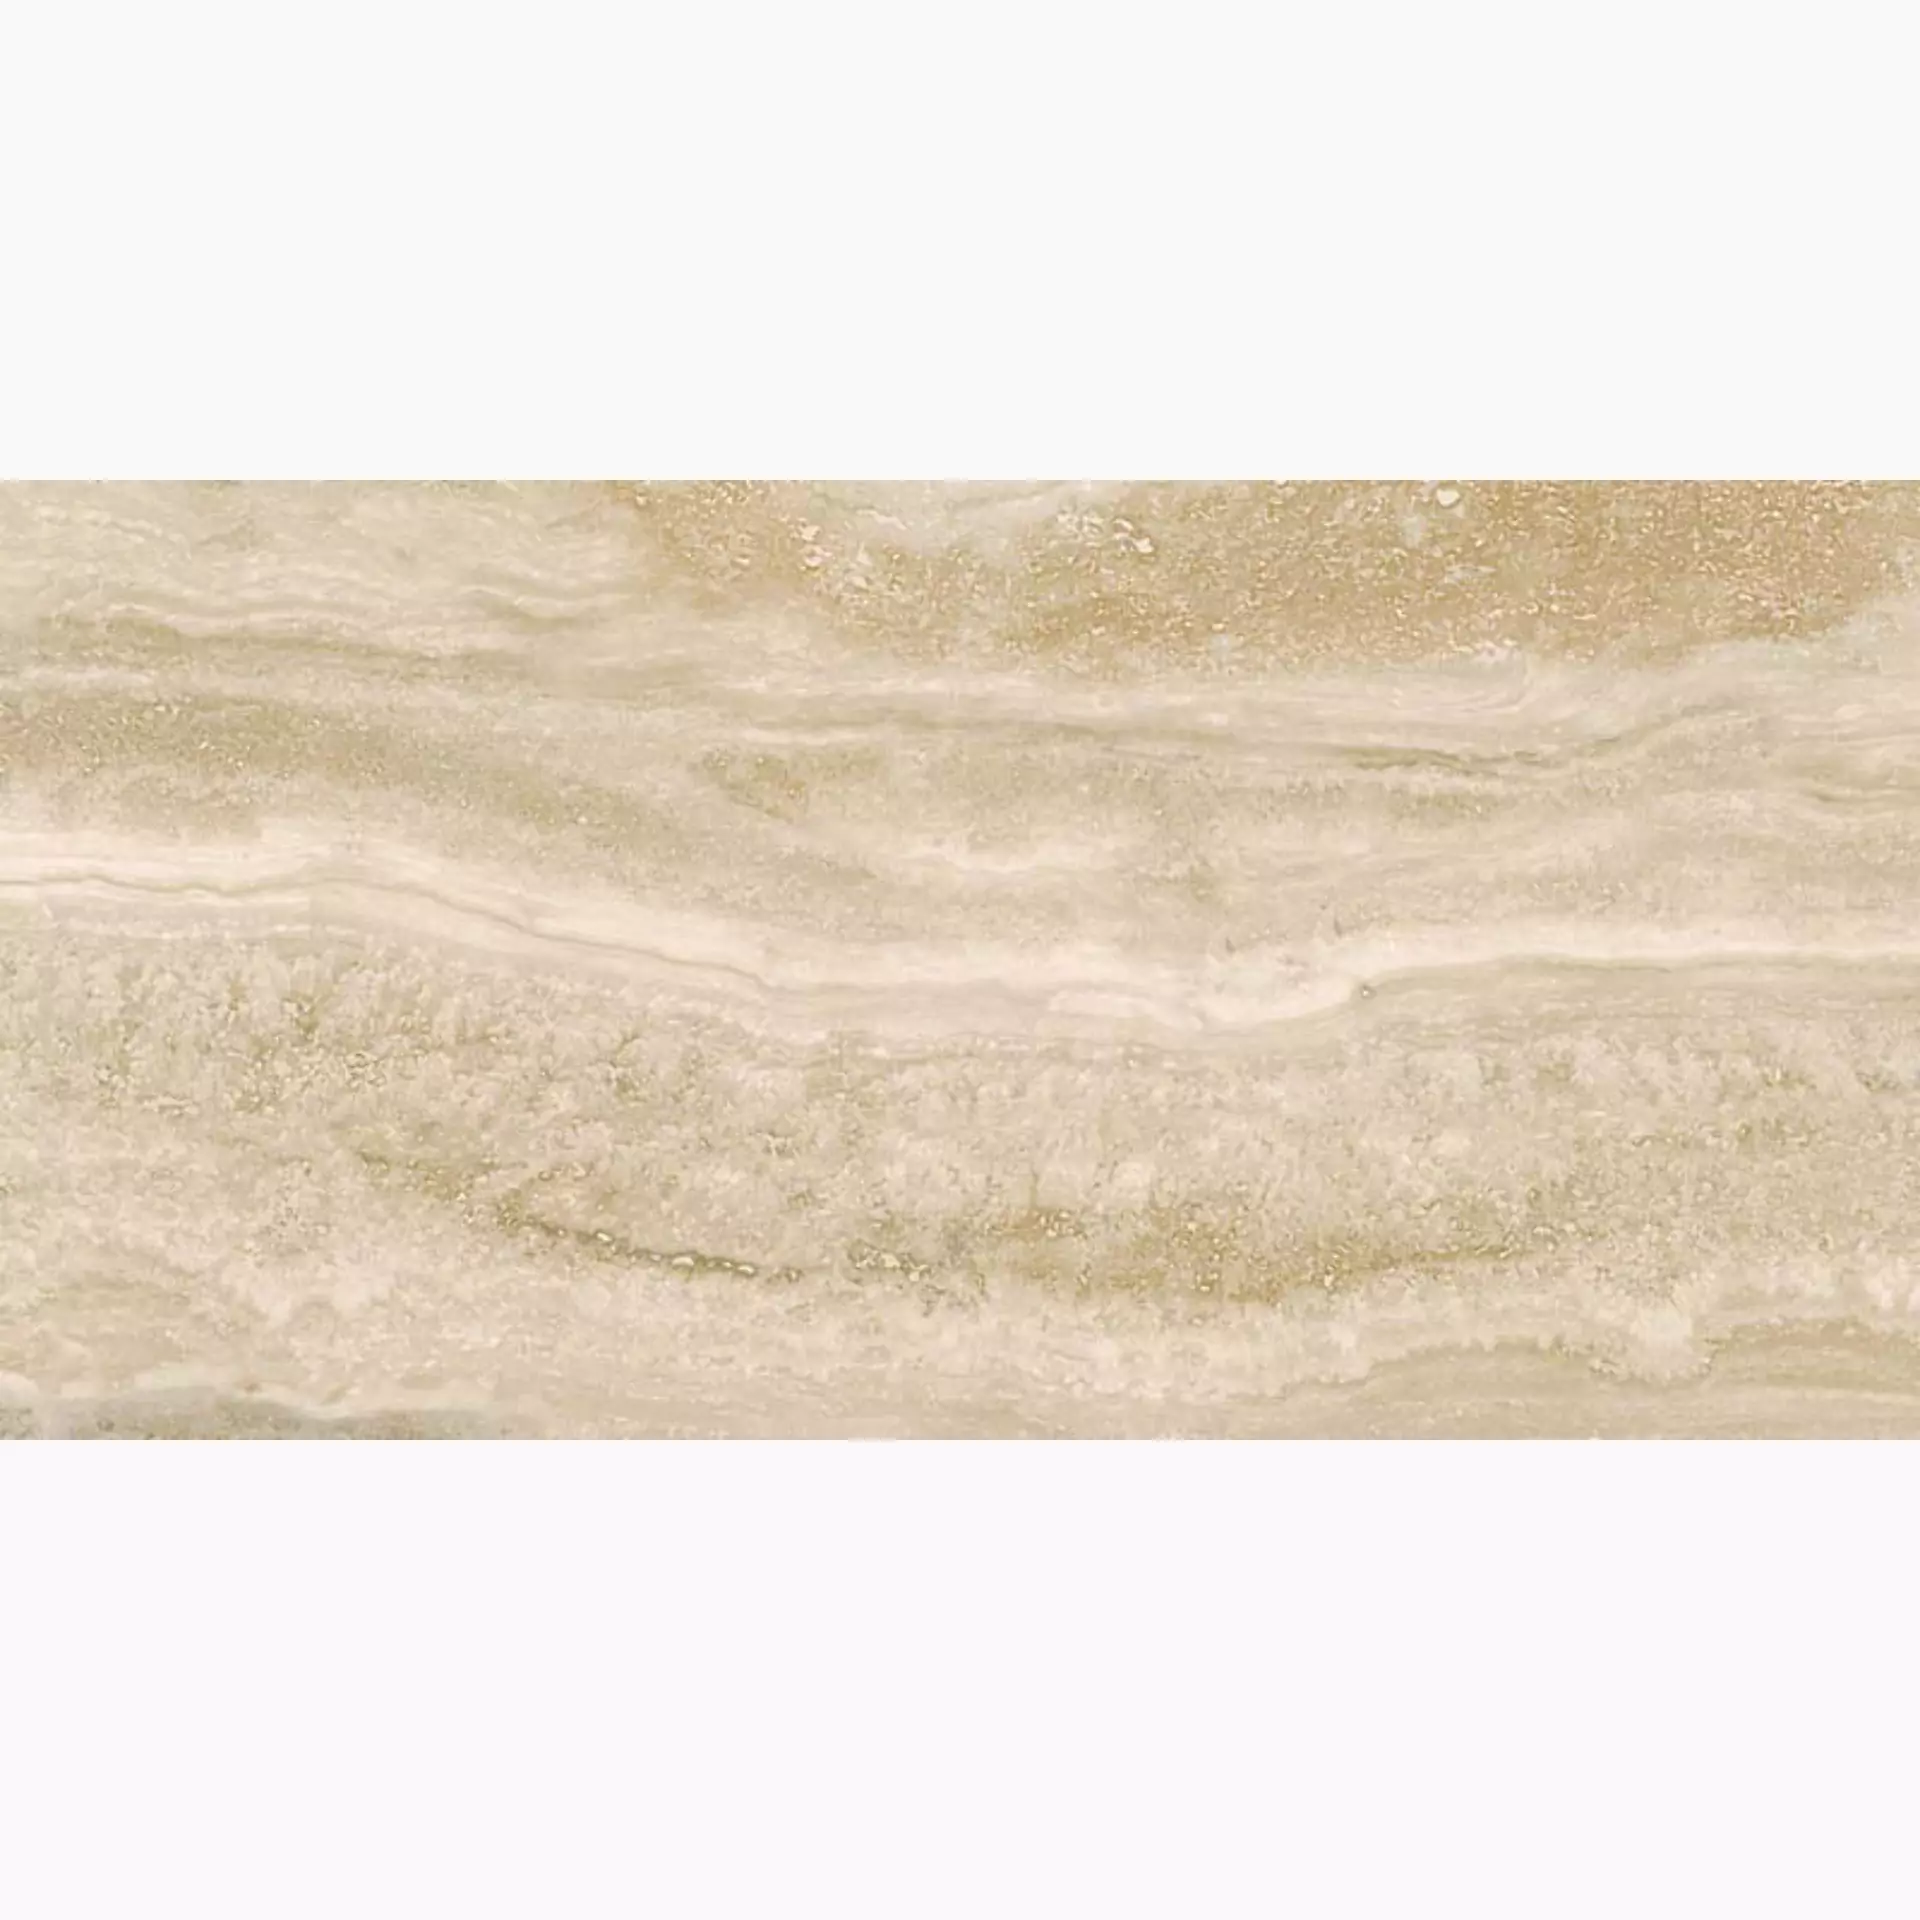 Sant Agostino Via Appia Beige Natural CSAAVCBE30 30x60cm rectified 10mm